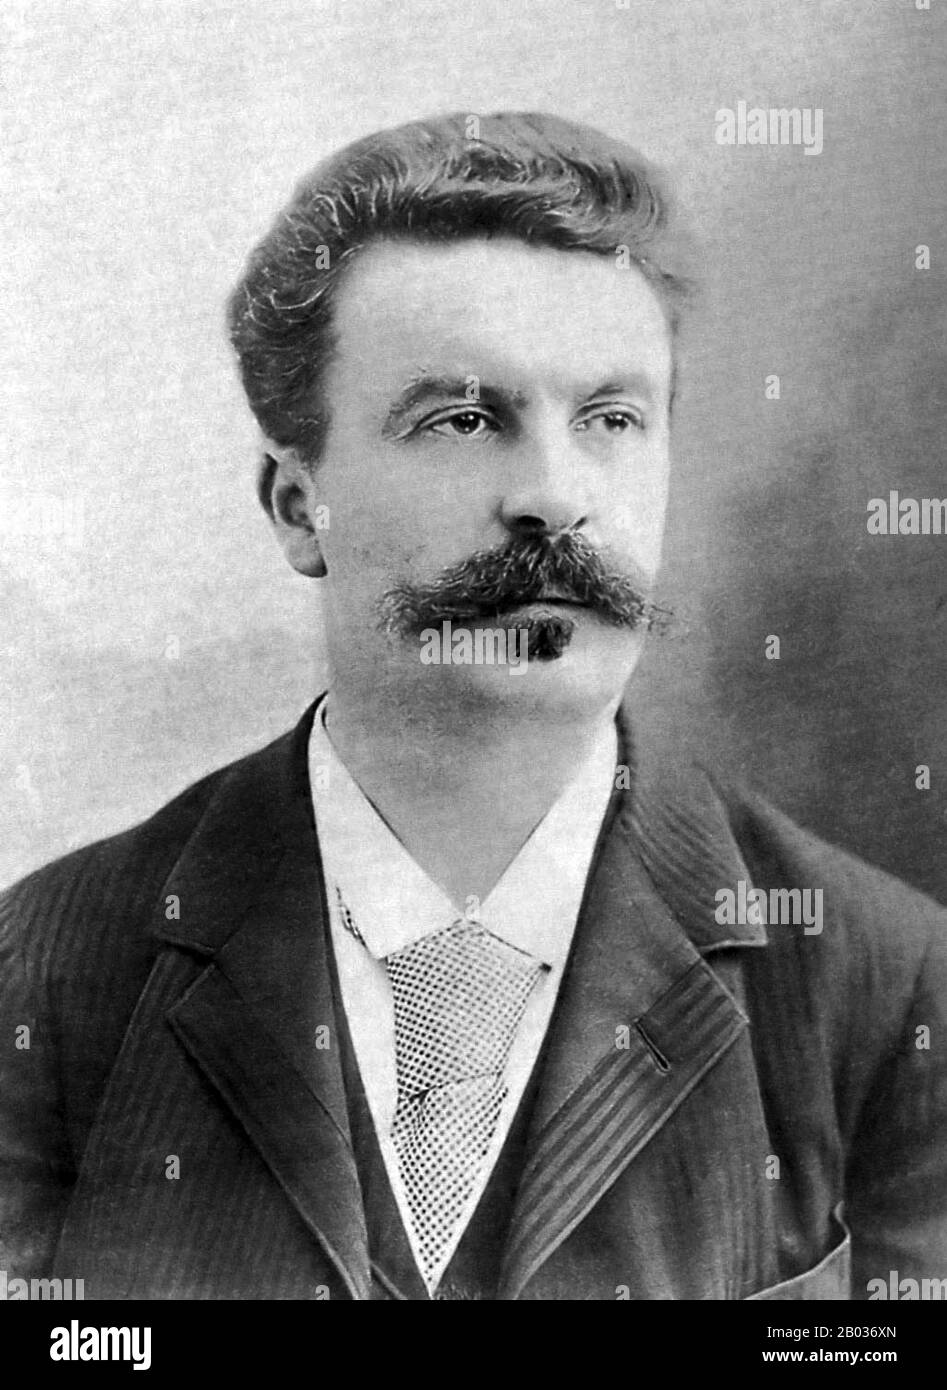 Henri Rene Albert Guy de Maupassant (5 August 1850 – 6 July 1893) was a French writer, remembered as a master of the short story form, and as a representative of the naturalist school of writers, who depicted human lives and destinies and social forces in disillusioned and often pessimistic terms. Stock Photo